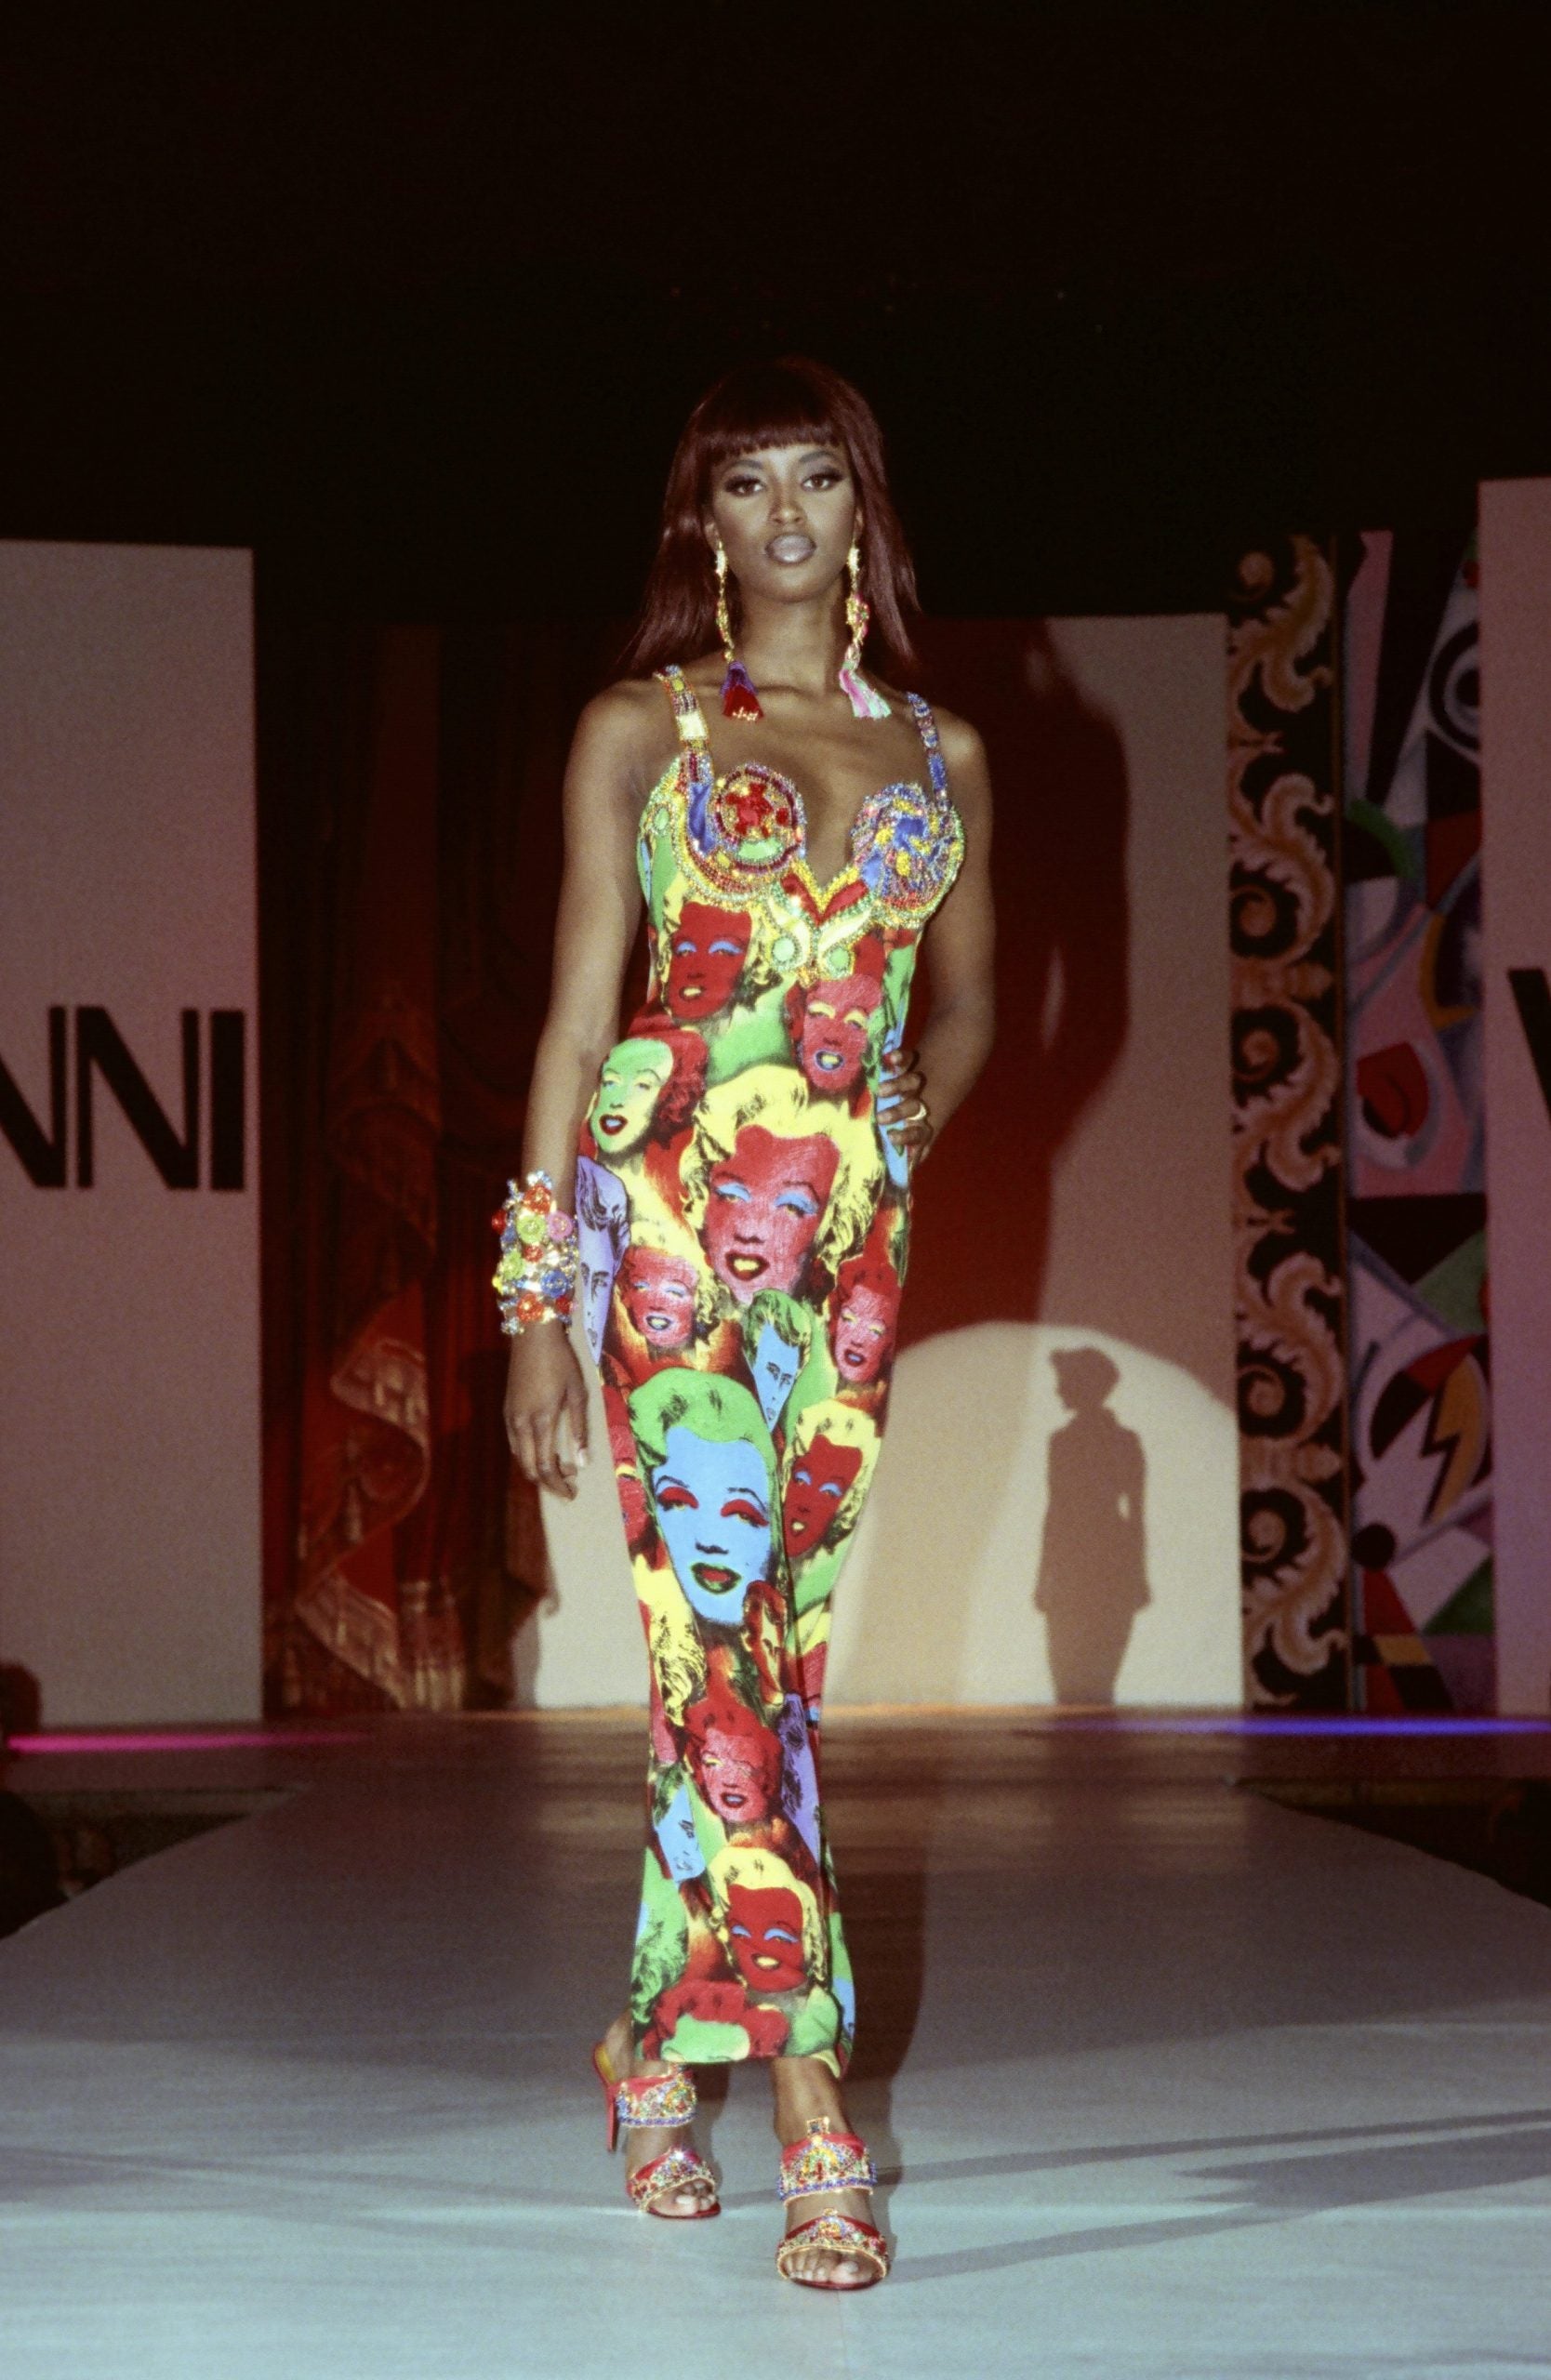 WATCH: Happy Birthday To The Supermodel Of The World, Naomi Campbell